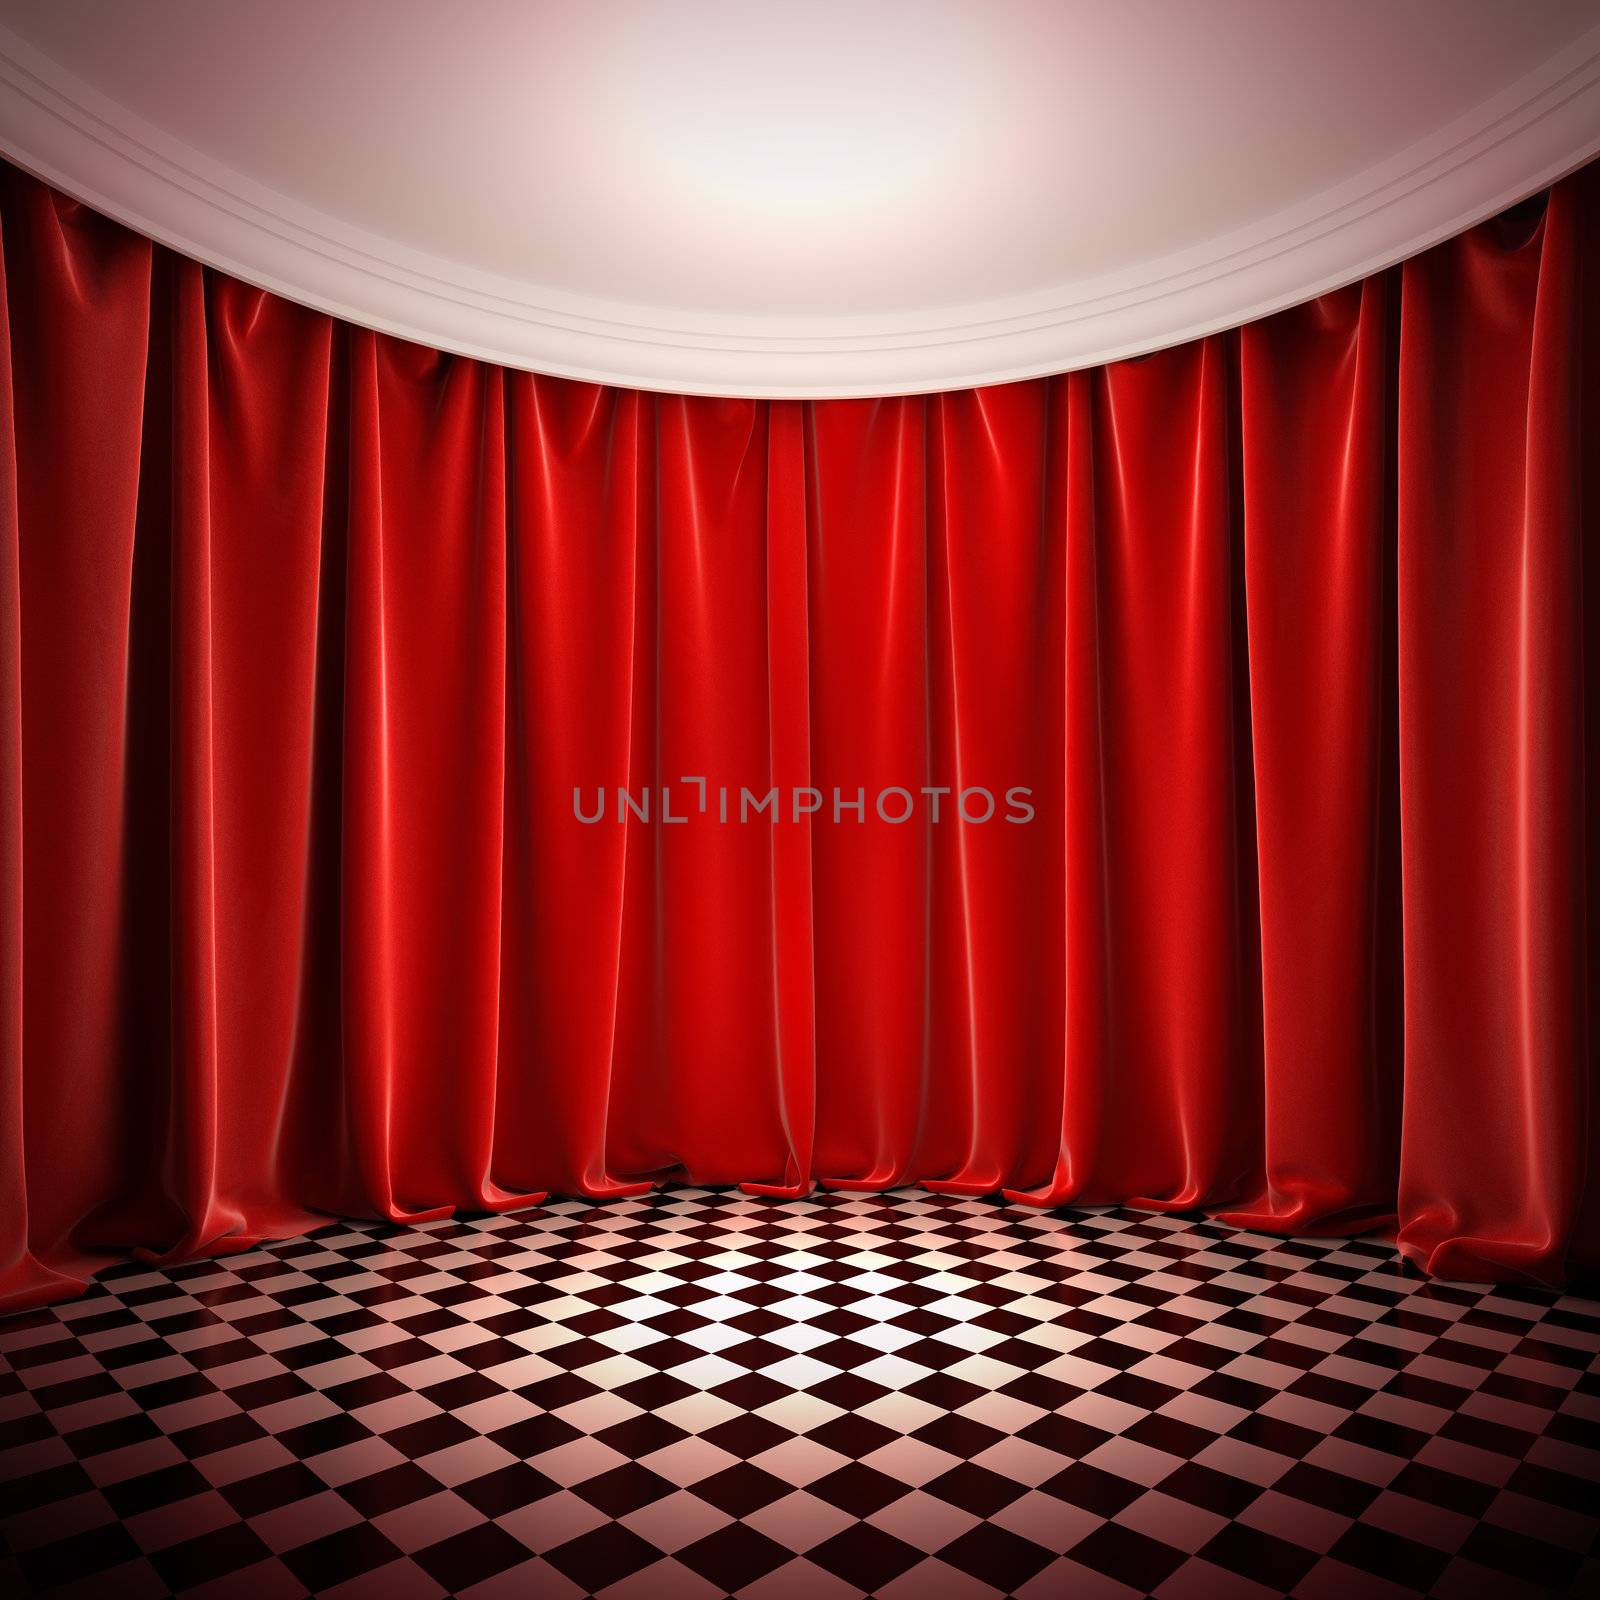 Empty hall with red curtains. A 3d illustration of empty stage in victorian style.